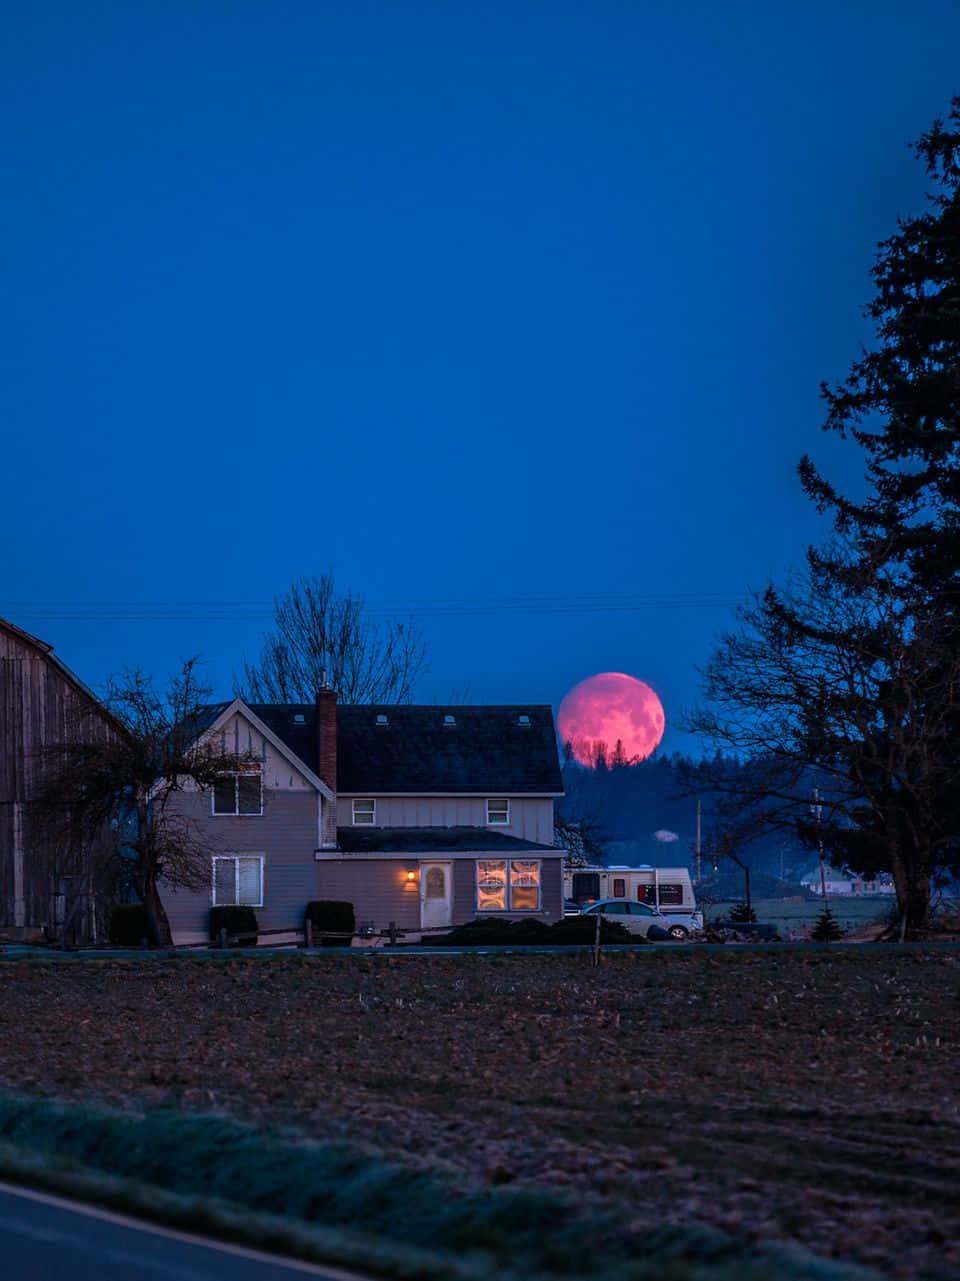 "Appreciating the beauty of the Pink Moon"